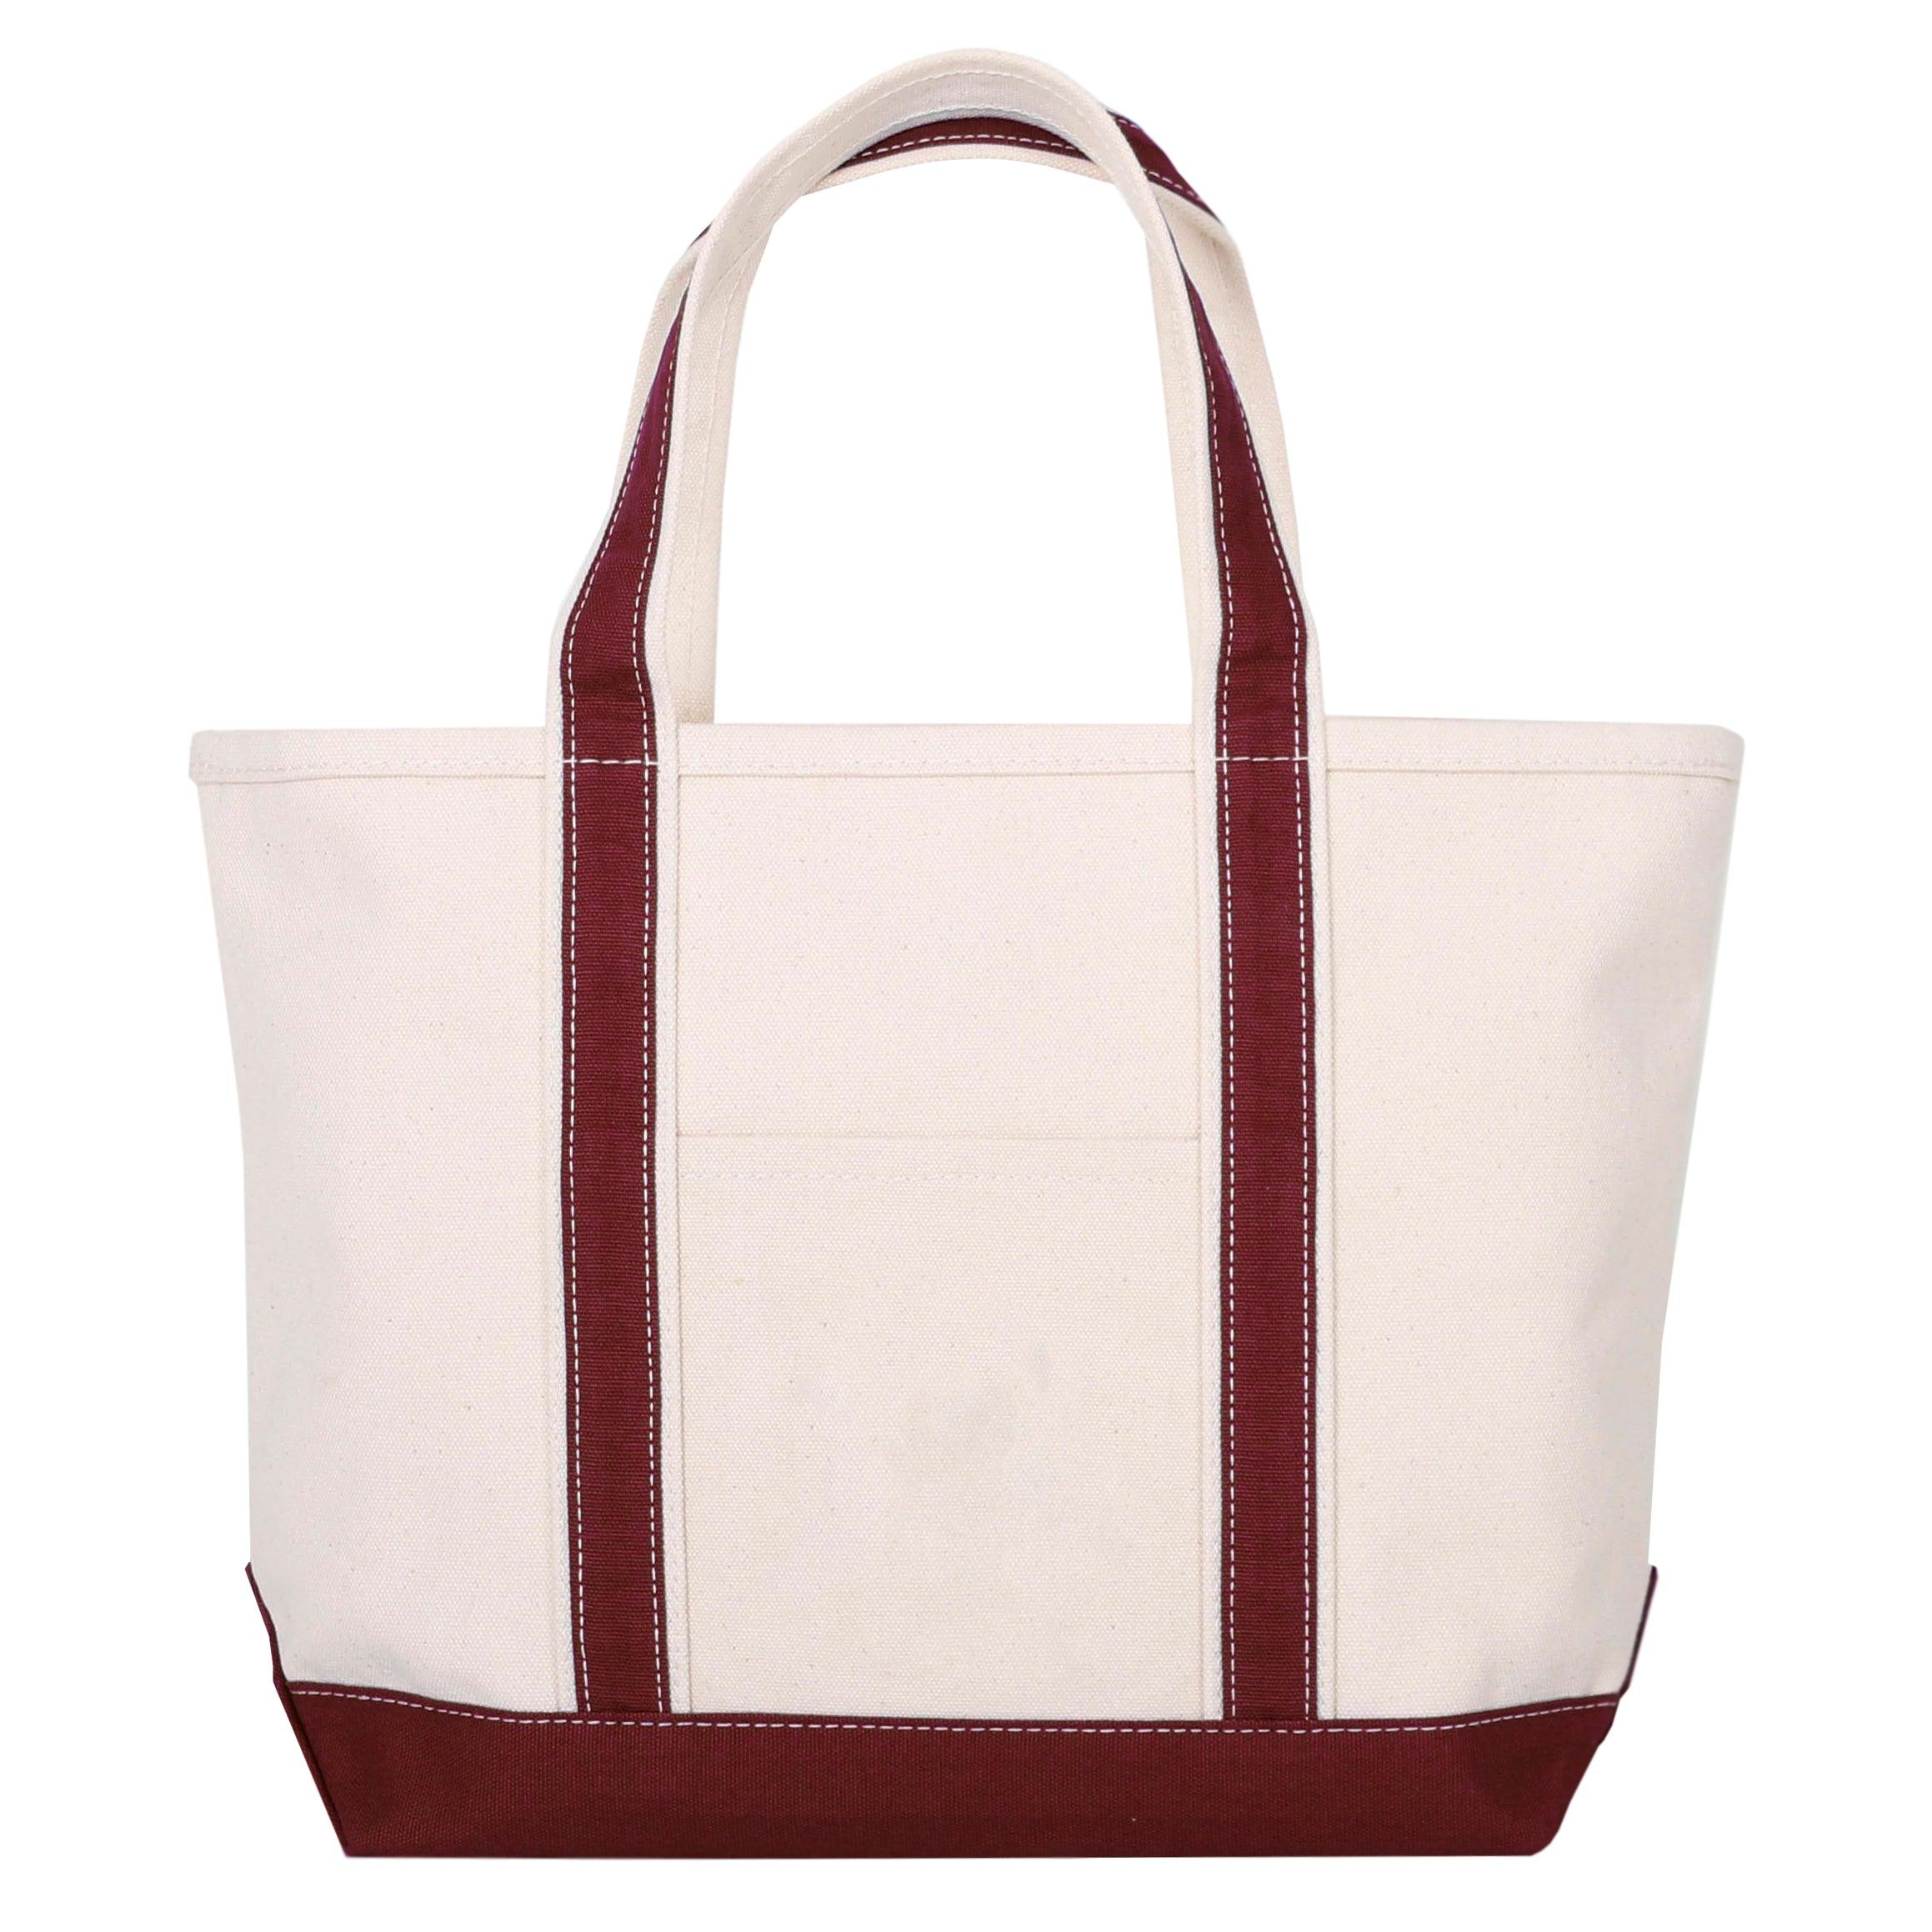 L.L.Bean Boat and Tote Large